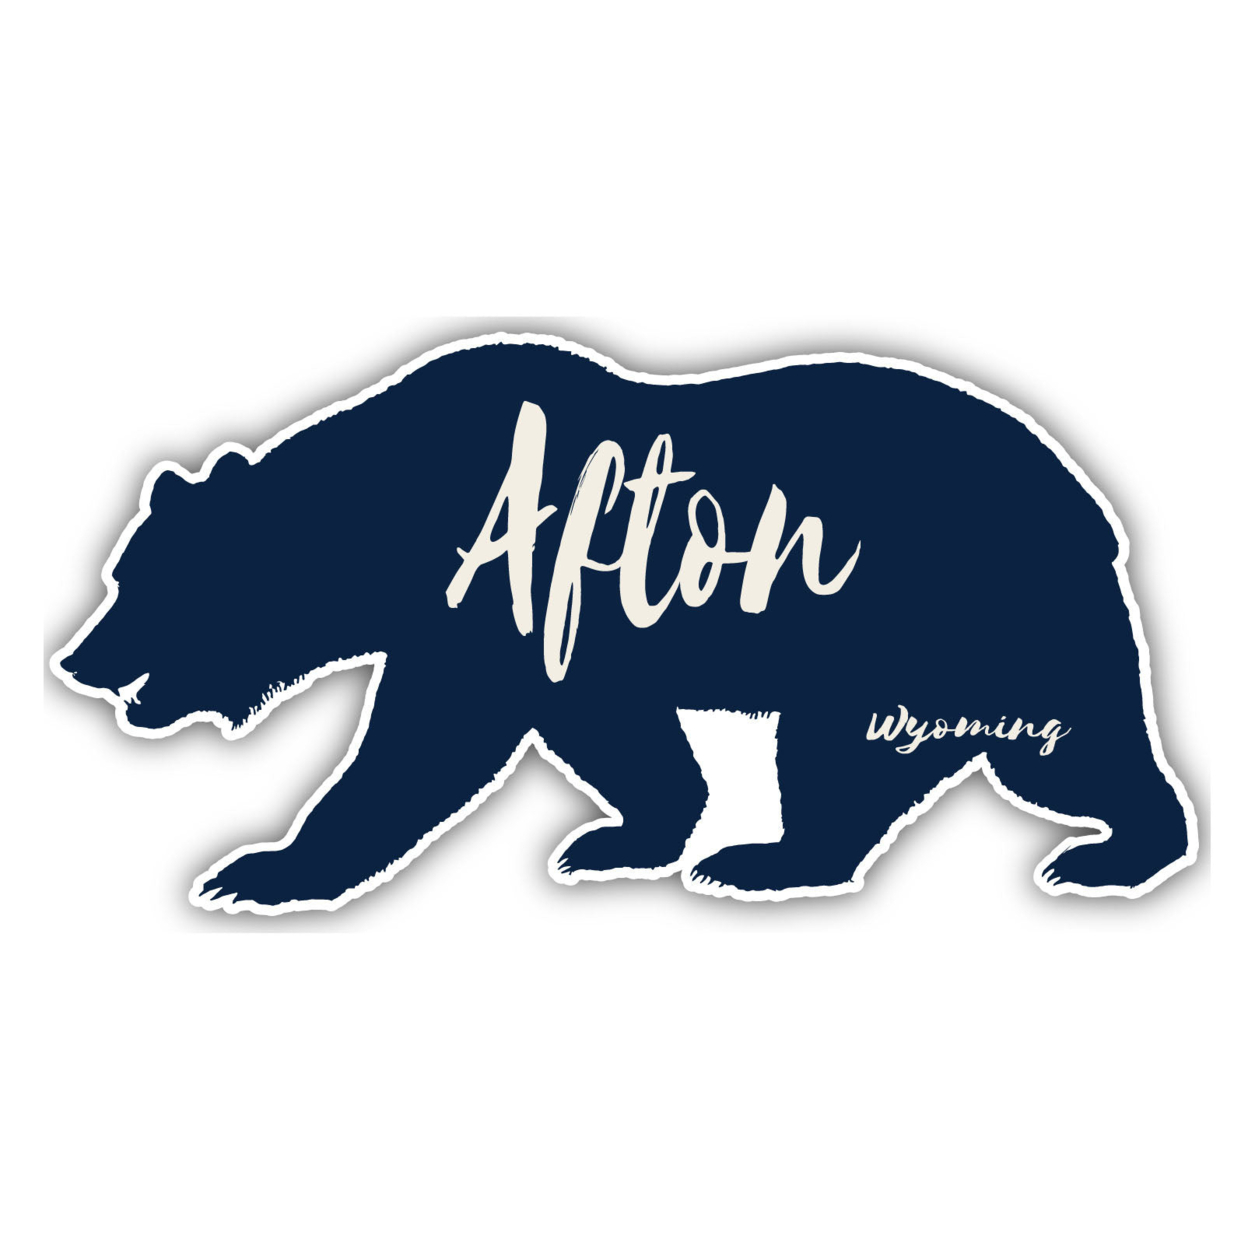 Afton Wyoming Souvenir Decorative Stickers (Choose Theme And Size) - Single Unit, 8-Inch, Bear